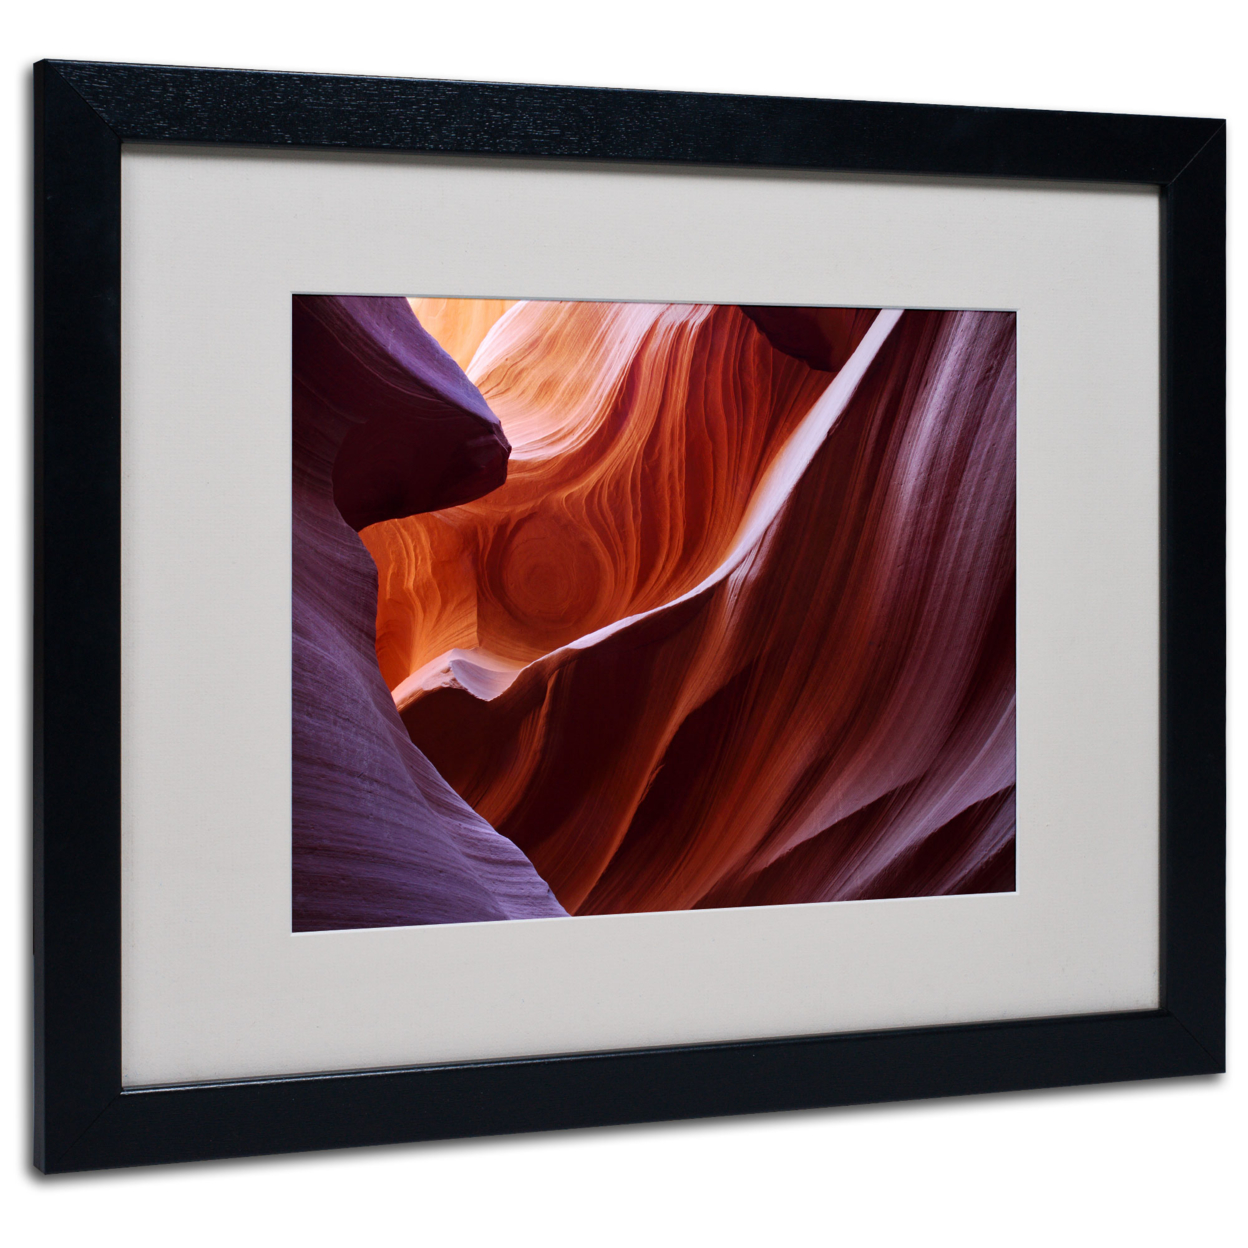 Pierre Leclerc 'Antelope Canyon' Black Wooden Framed Art 18 X 22 Inches